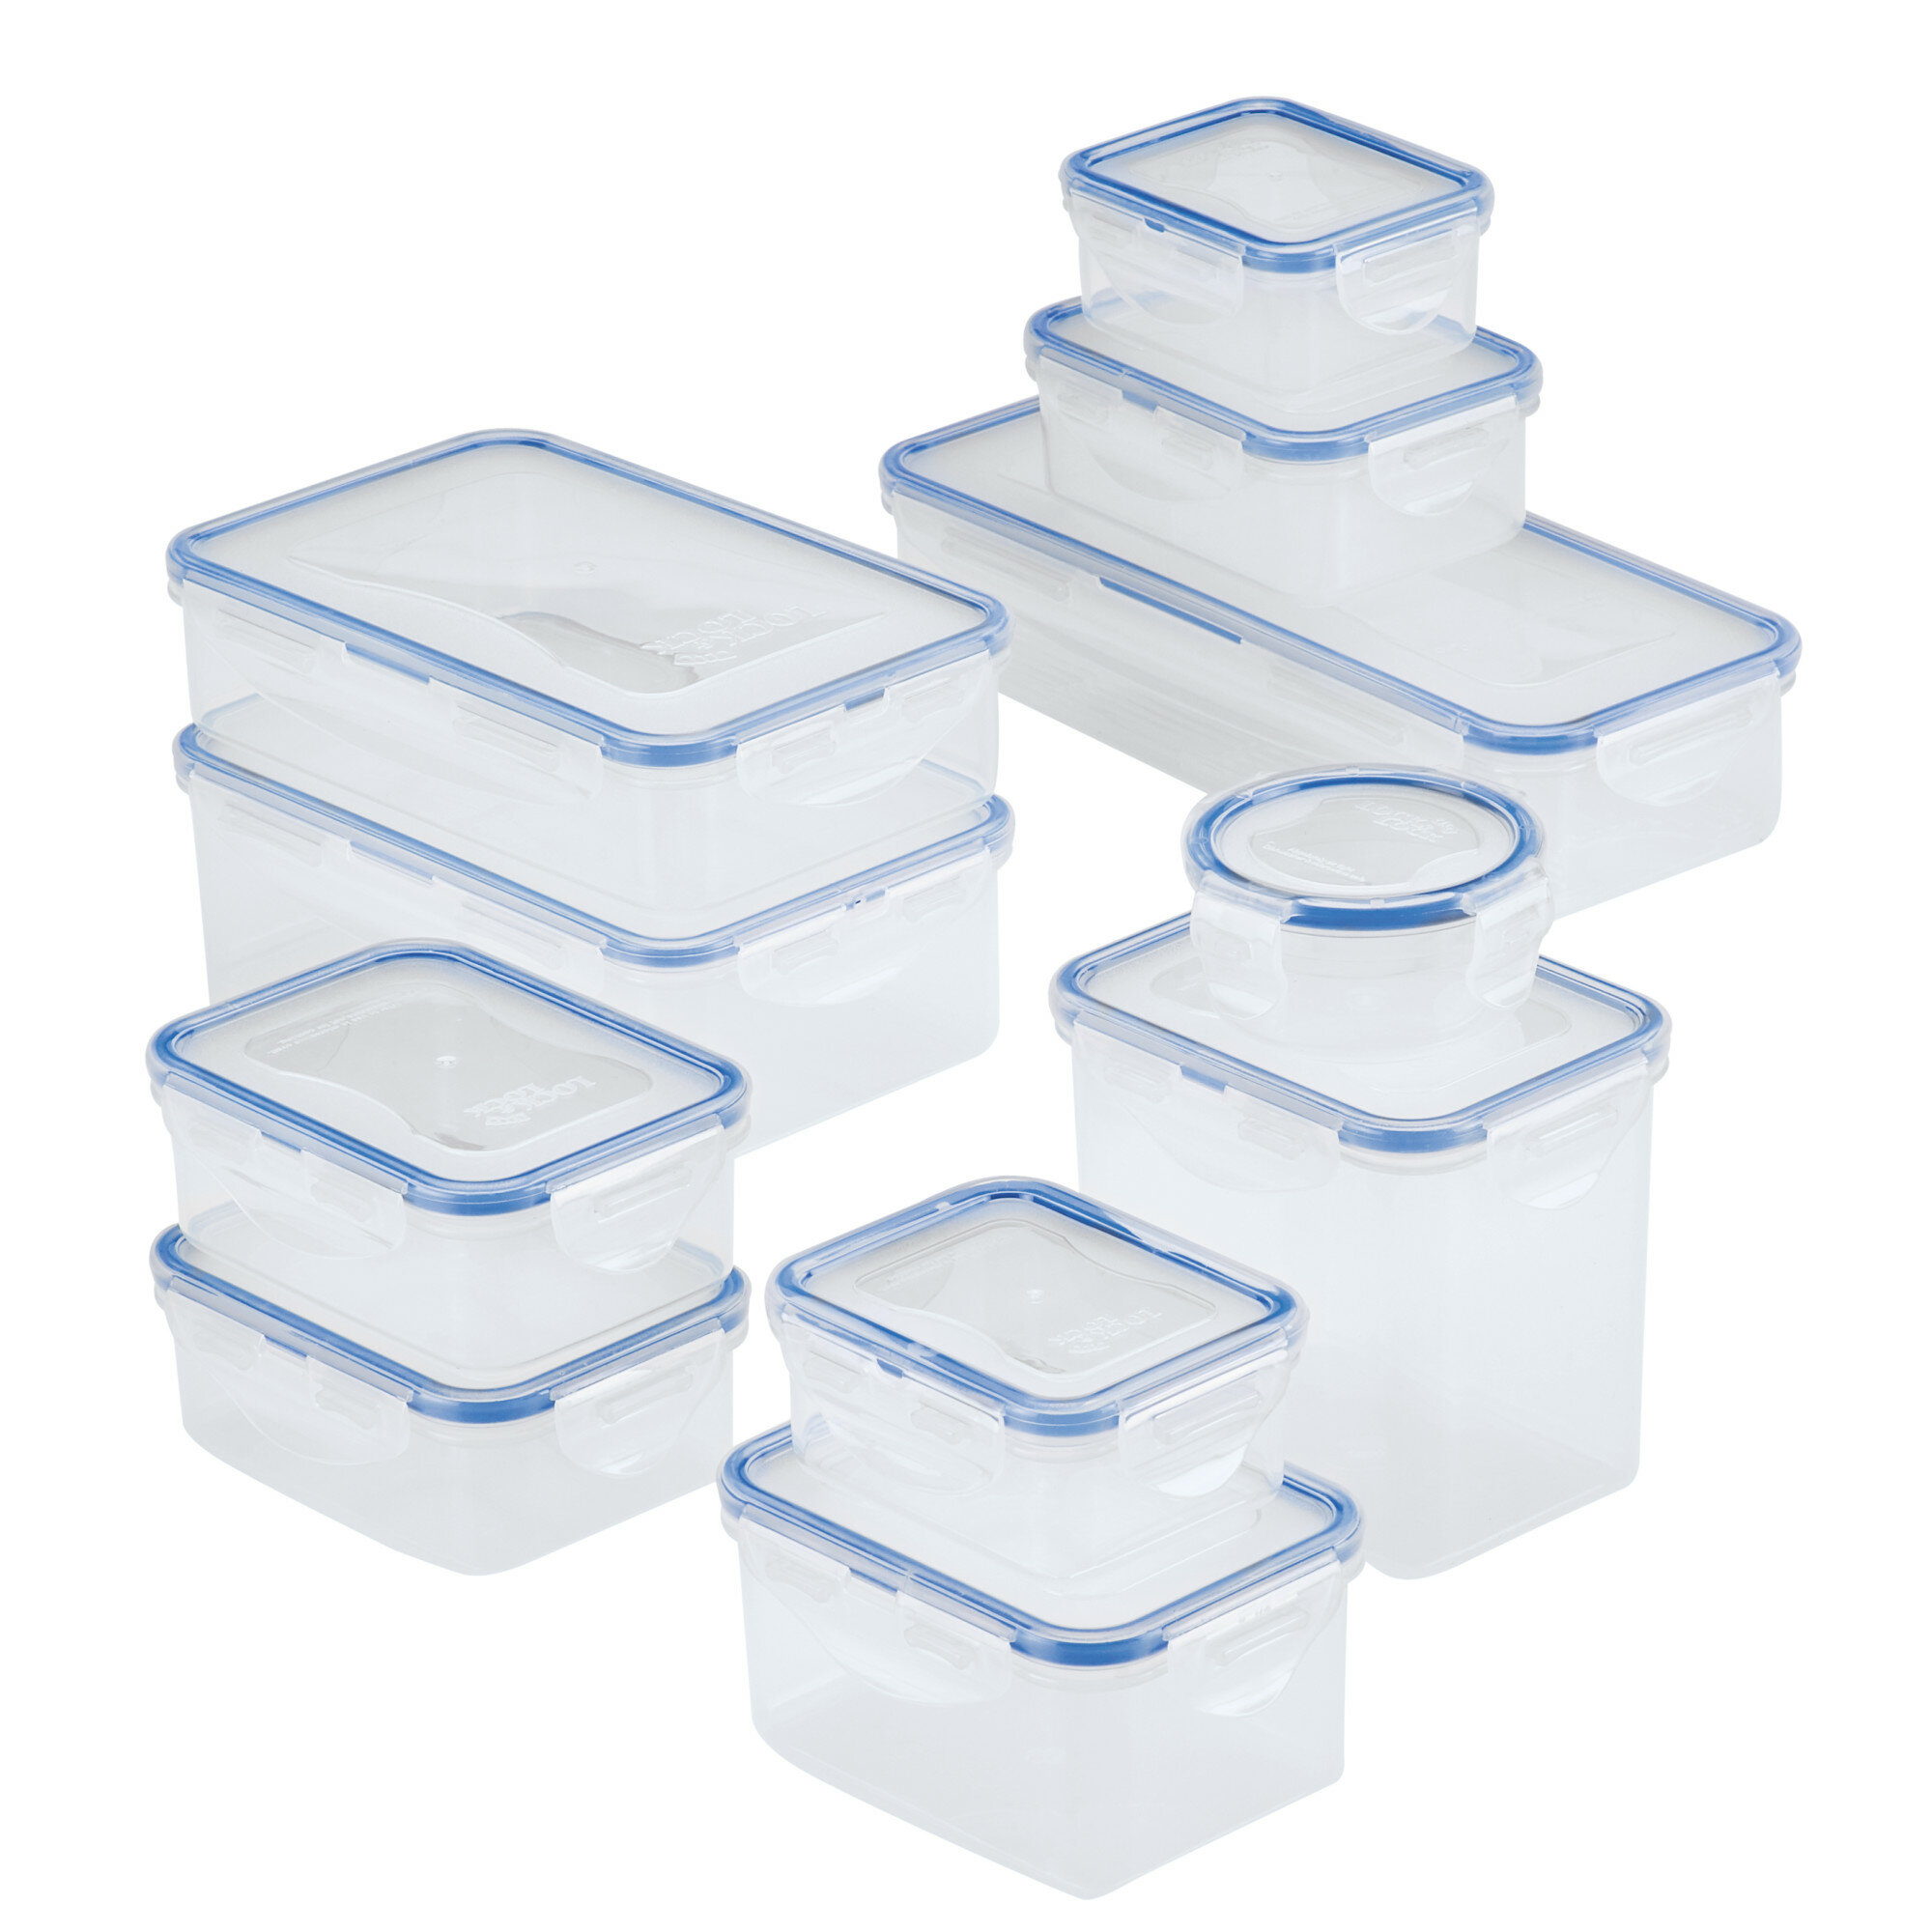 Lock&Lock 11pc Set Square Rectangle Round All Clear Containers BPA-Free Plastic 